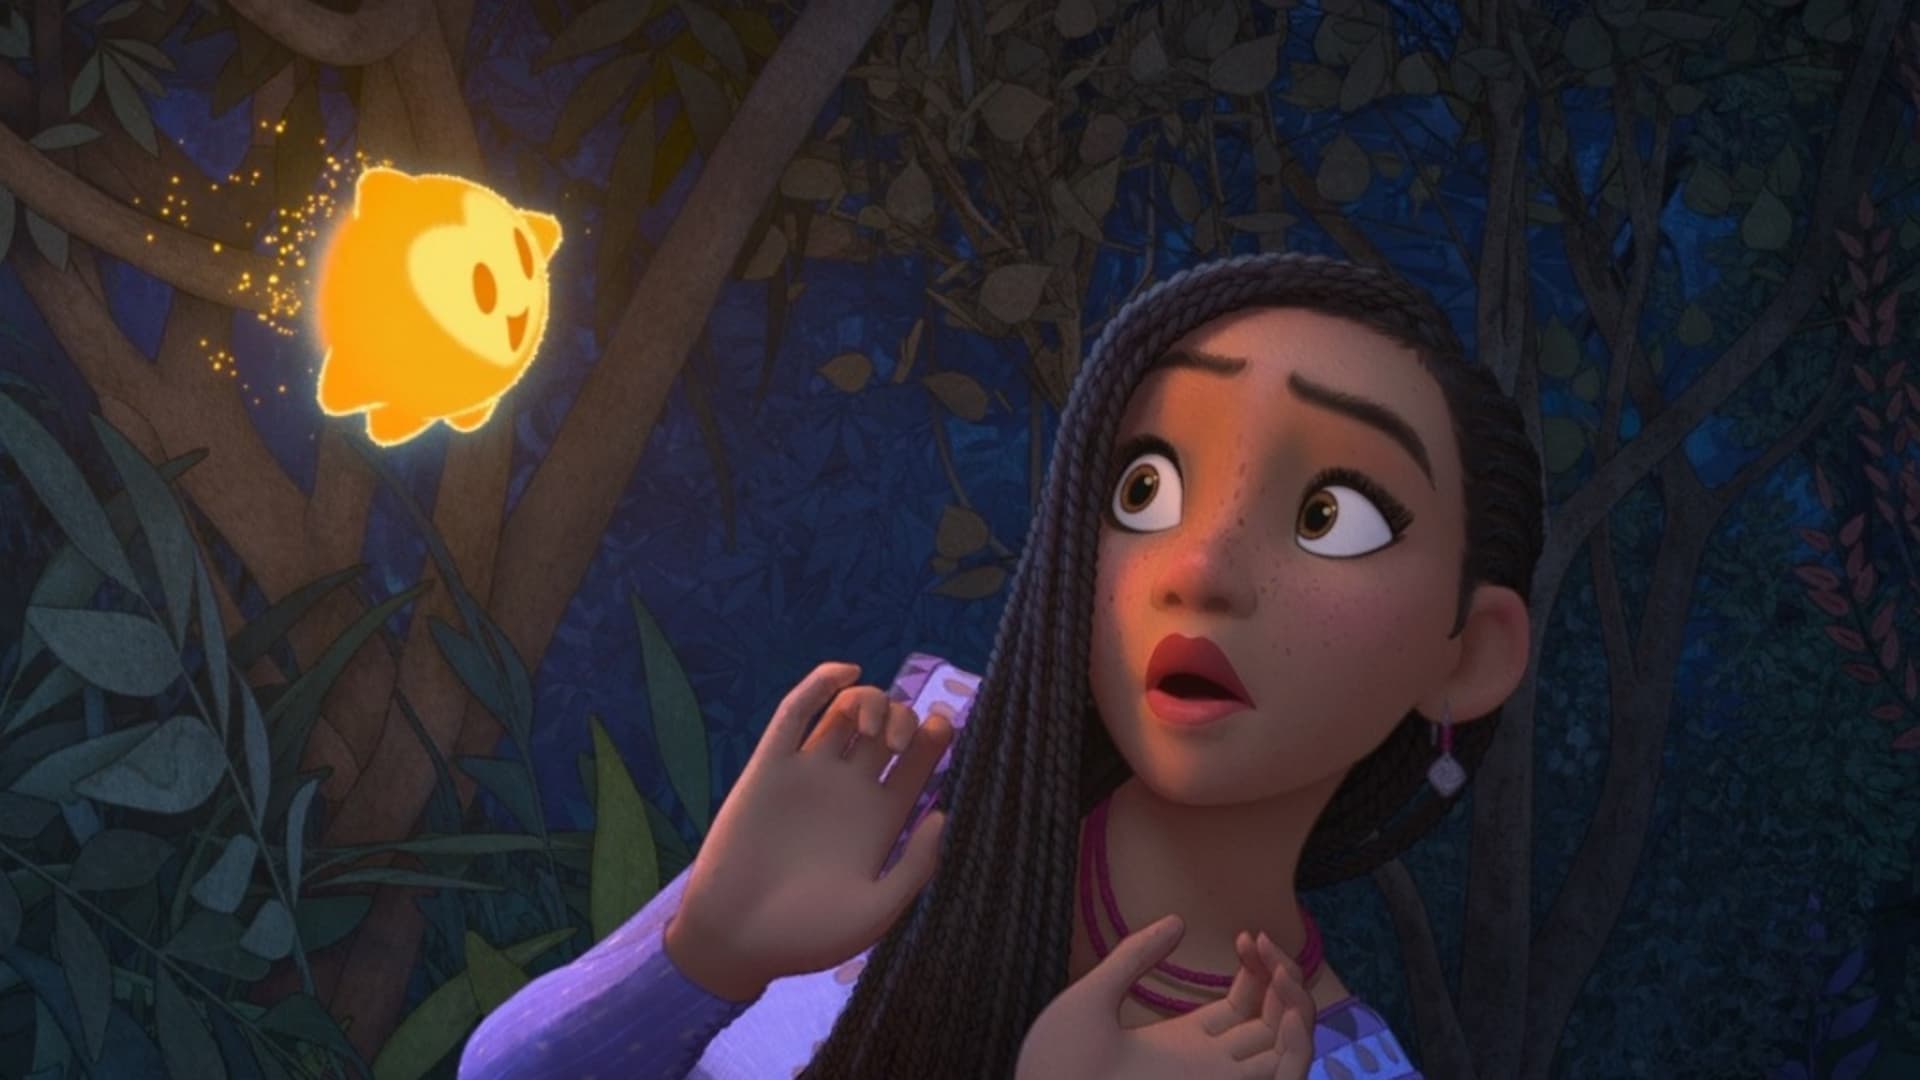 Disney's 'Wish' disappoints during Thanksgiving, extending an animation box office rut